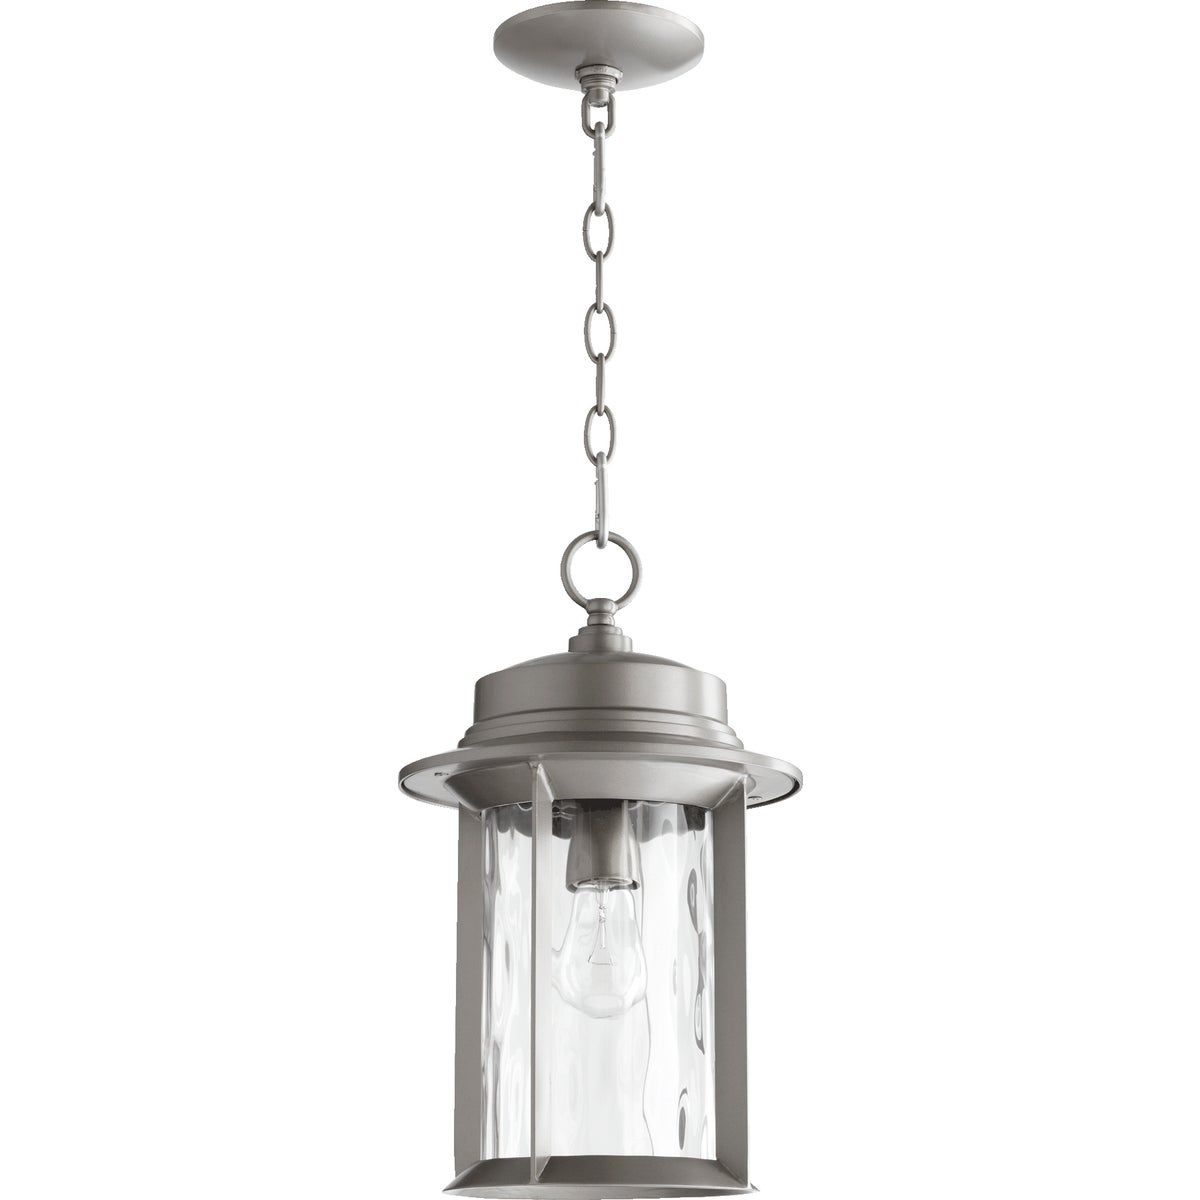 A mid century modern outdoor hanging light fixture with a clean-lined drum silhouette and hammered glass panes. Durable metal construction. Fits a single dimmable 100W bulb (not included).